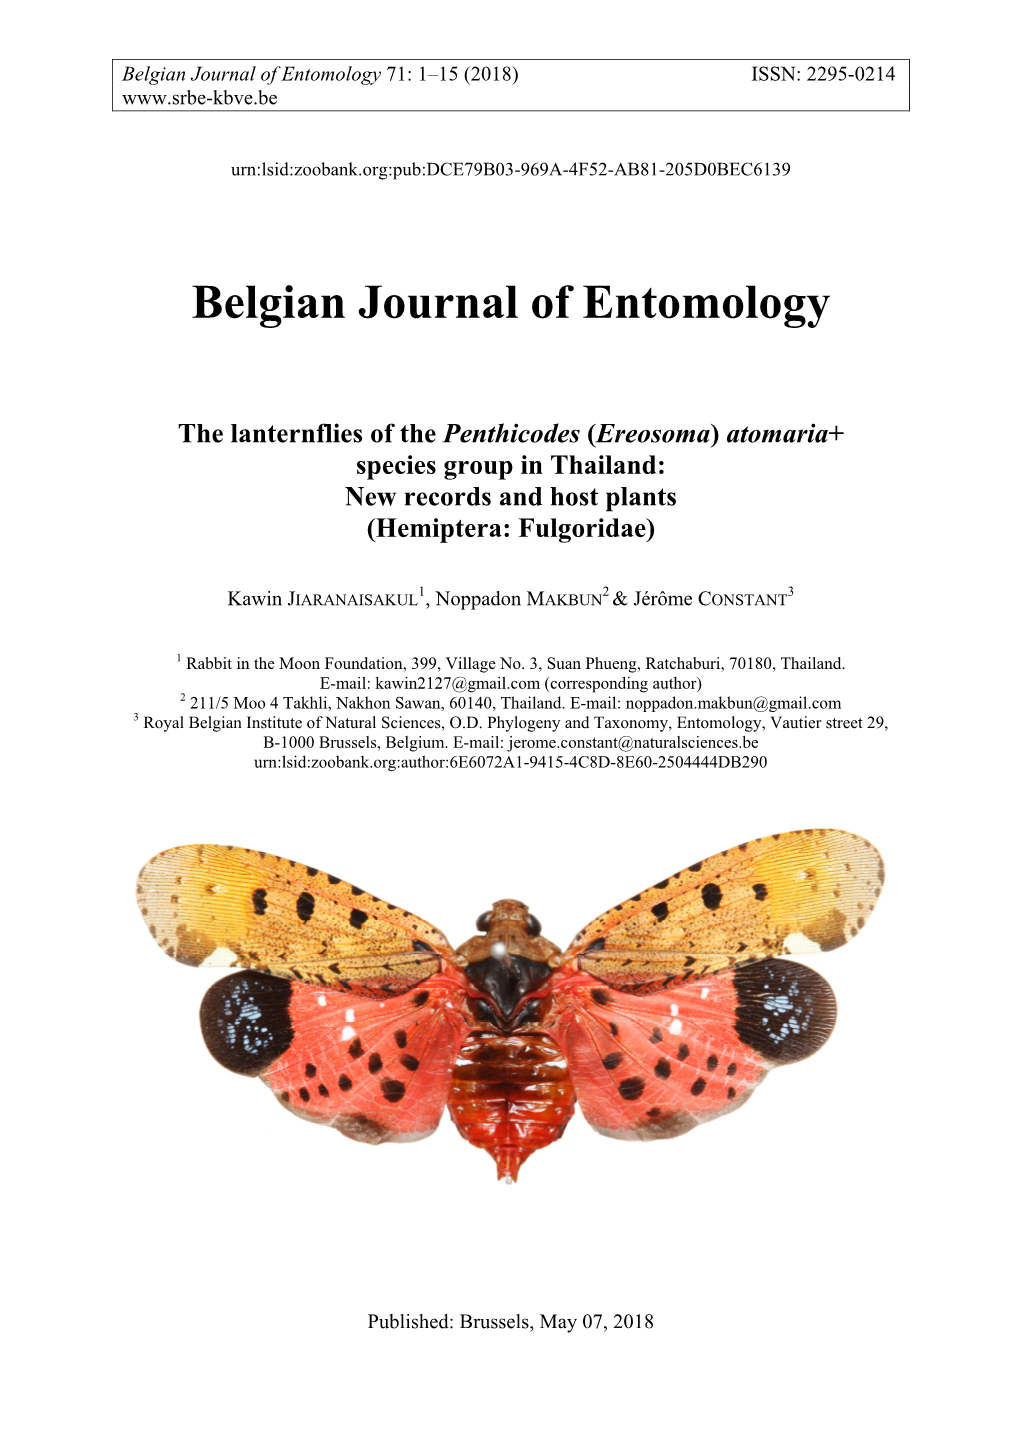 The Lanternflies of the Penthicodes (Ereosoma) Atomaria+ Species Group in Thailand: New Records and Host Plants (Hemiptera: Fulgoridae)